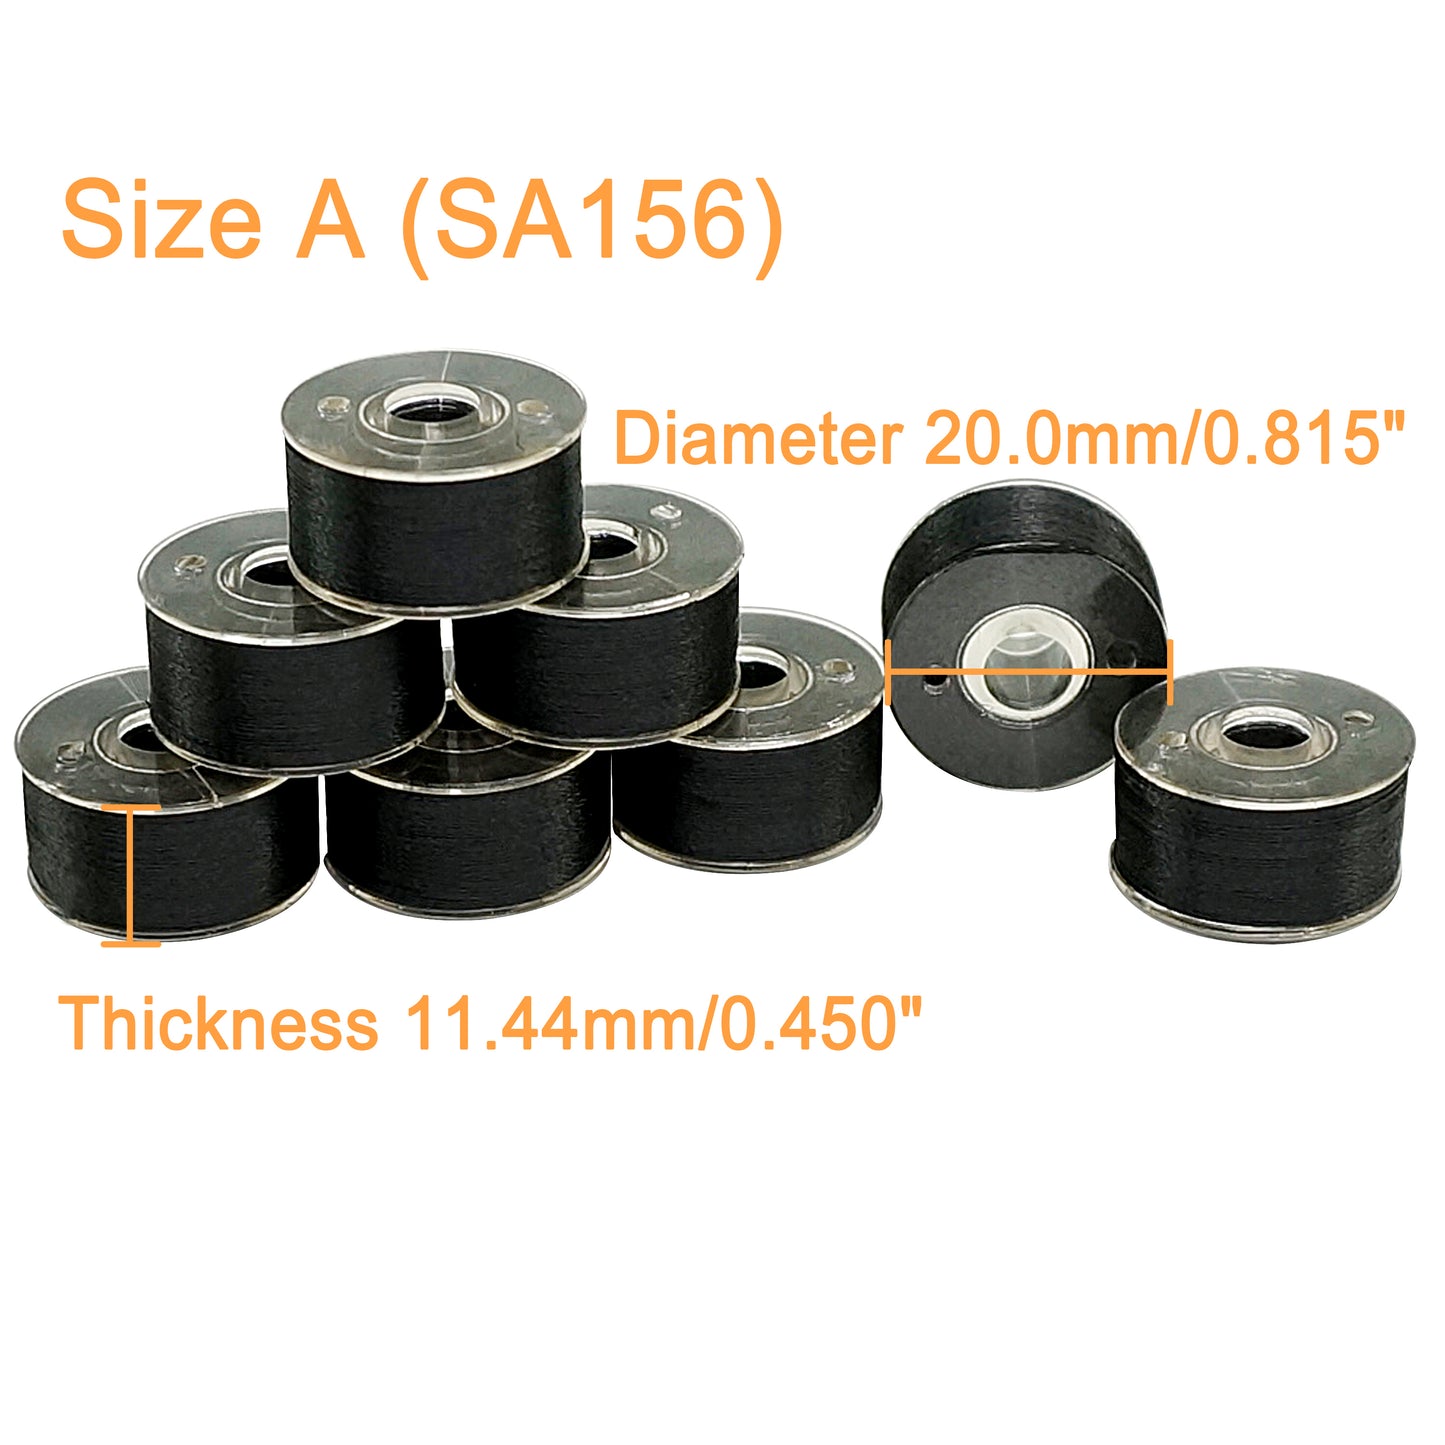 New brothread 25pcs 70D/2 (60WT) Prewound Bobbin Thread Plastic Size A SA156 for Embroidery and Sewing Machines DIY